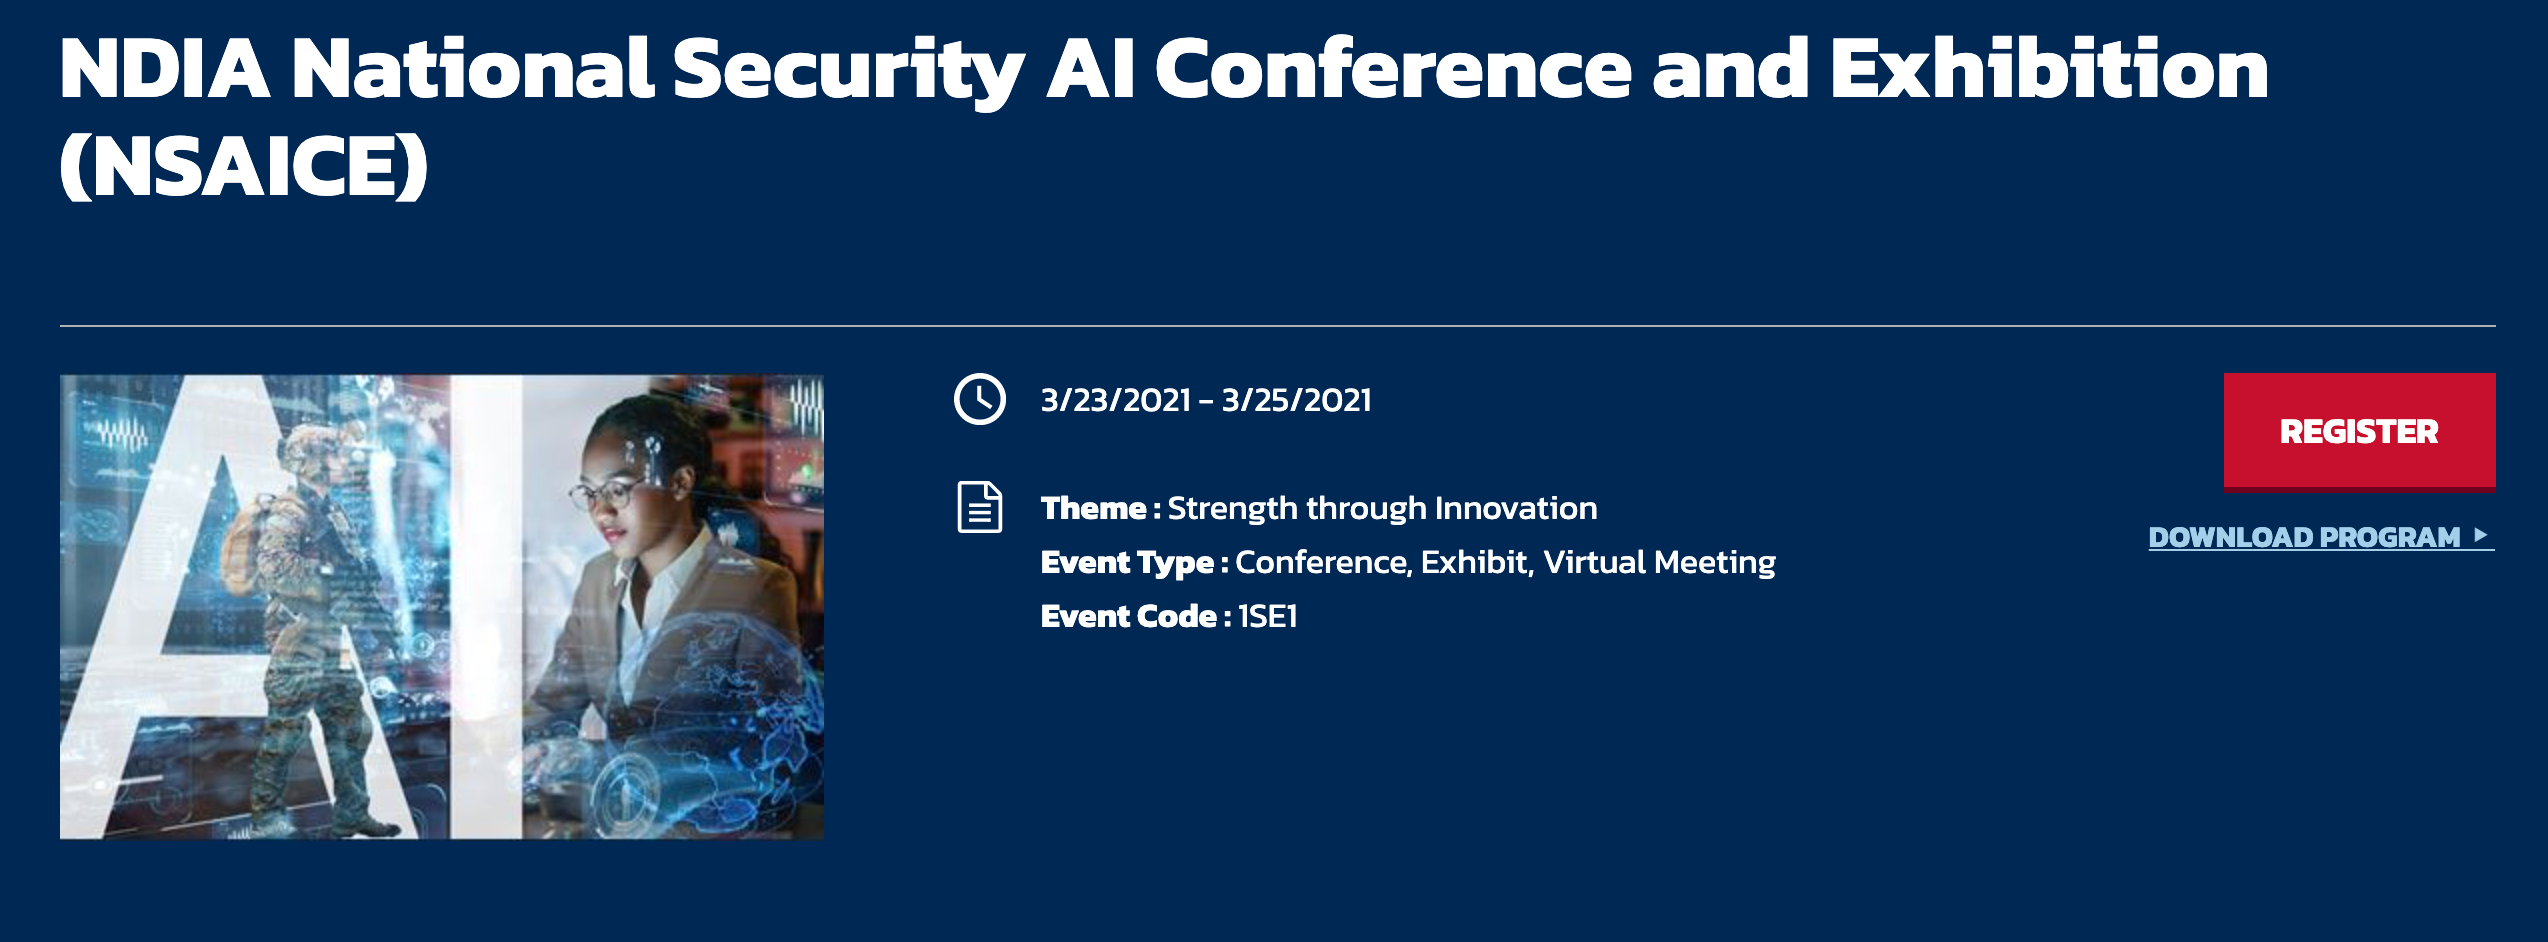 NDIA National Security AI Conference and Exhibition (NSAICE) Ohio